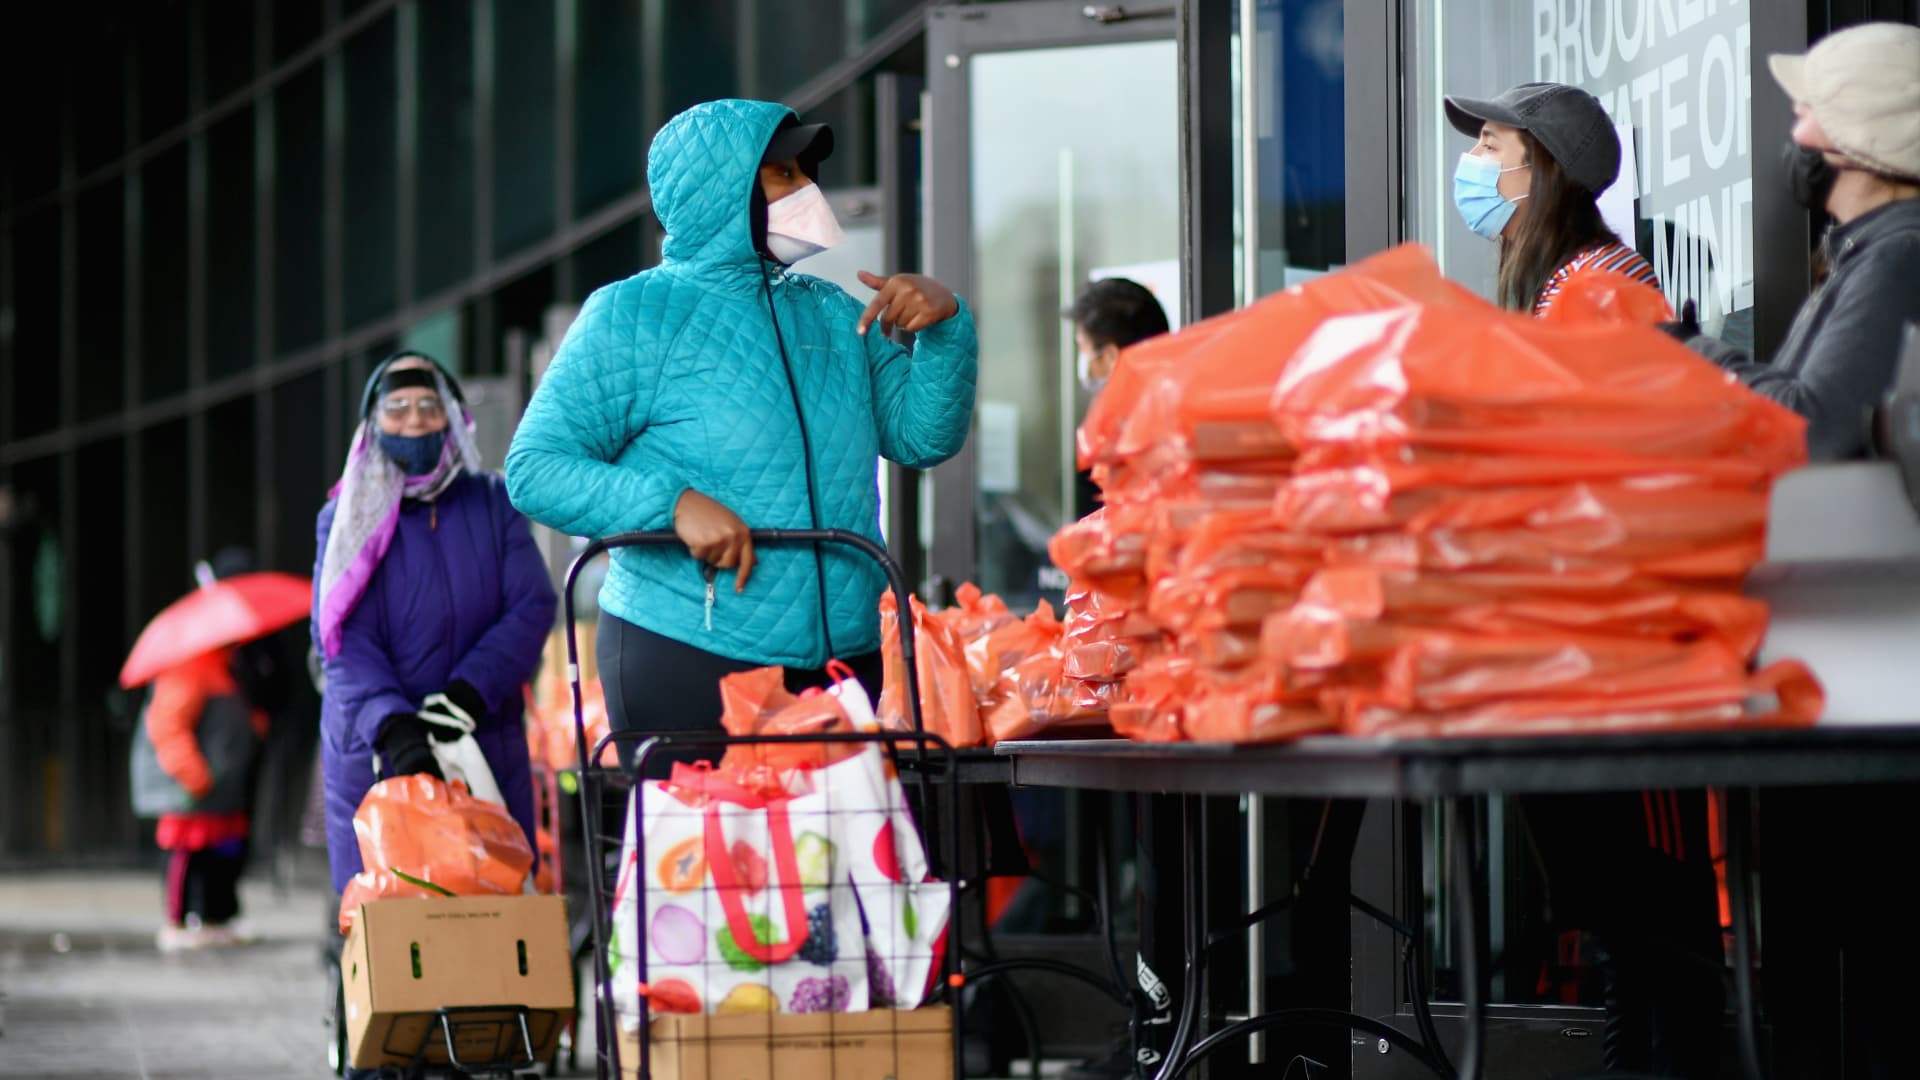 People pick up food the Food Bank at the New York City mobile food pantry on the Barclays Center plaza on April 24, 2020 in the Brooklyn, New York.